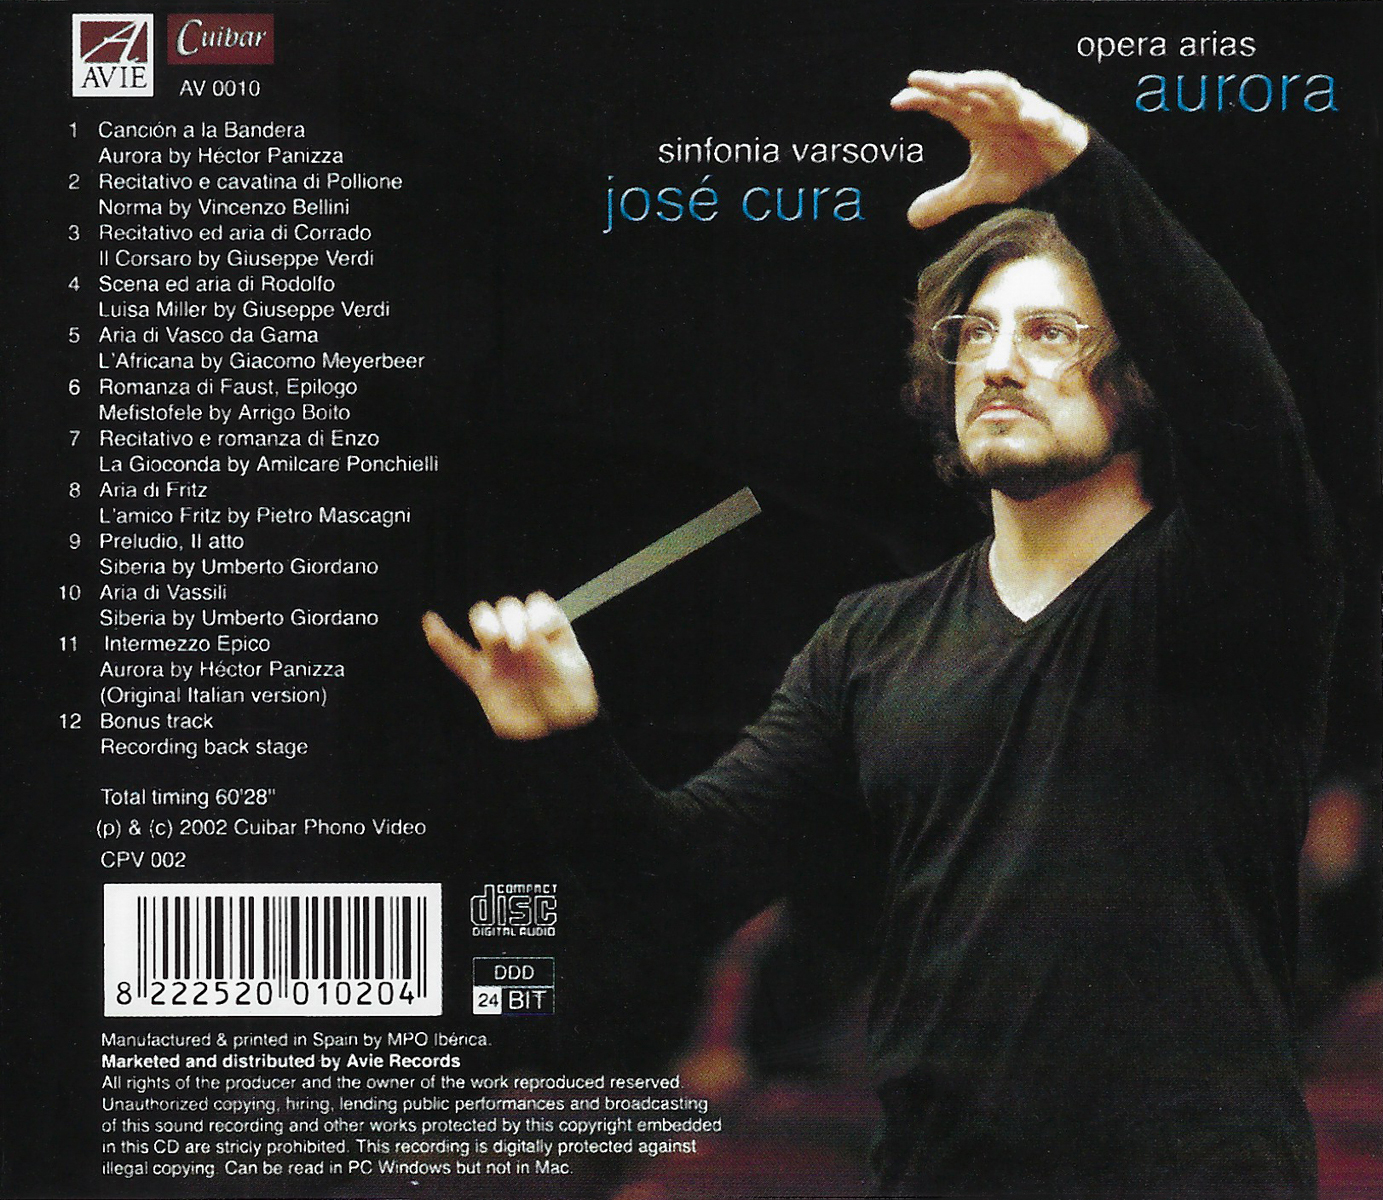 Jos Cura, Vocalist and Conductor, Aurora CD Release 2002.